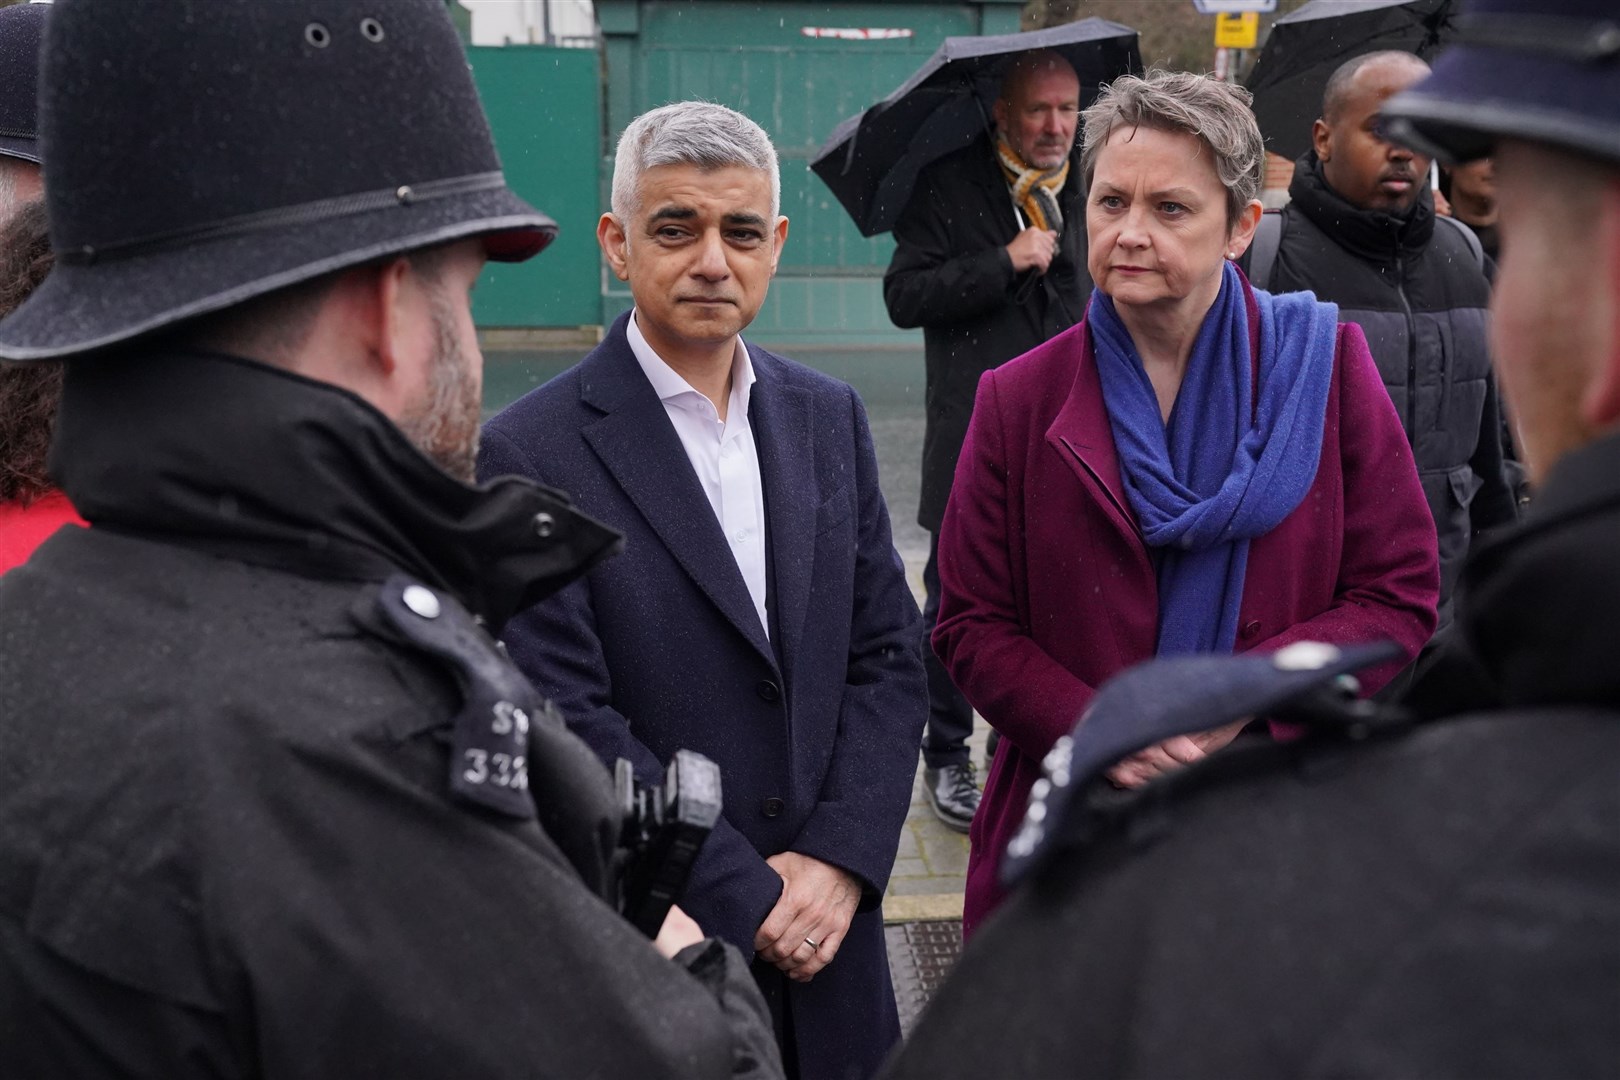 Mayor of London Sadiq Khan and shadow home secretary Yvette Cooper speak with police officers during a visit to Earlsfield police station (Jonathan Brady/PA)